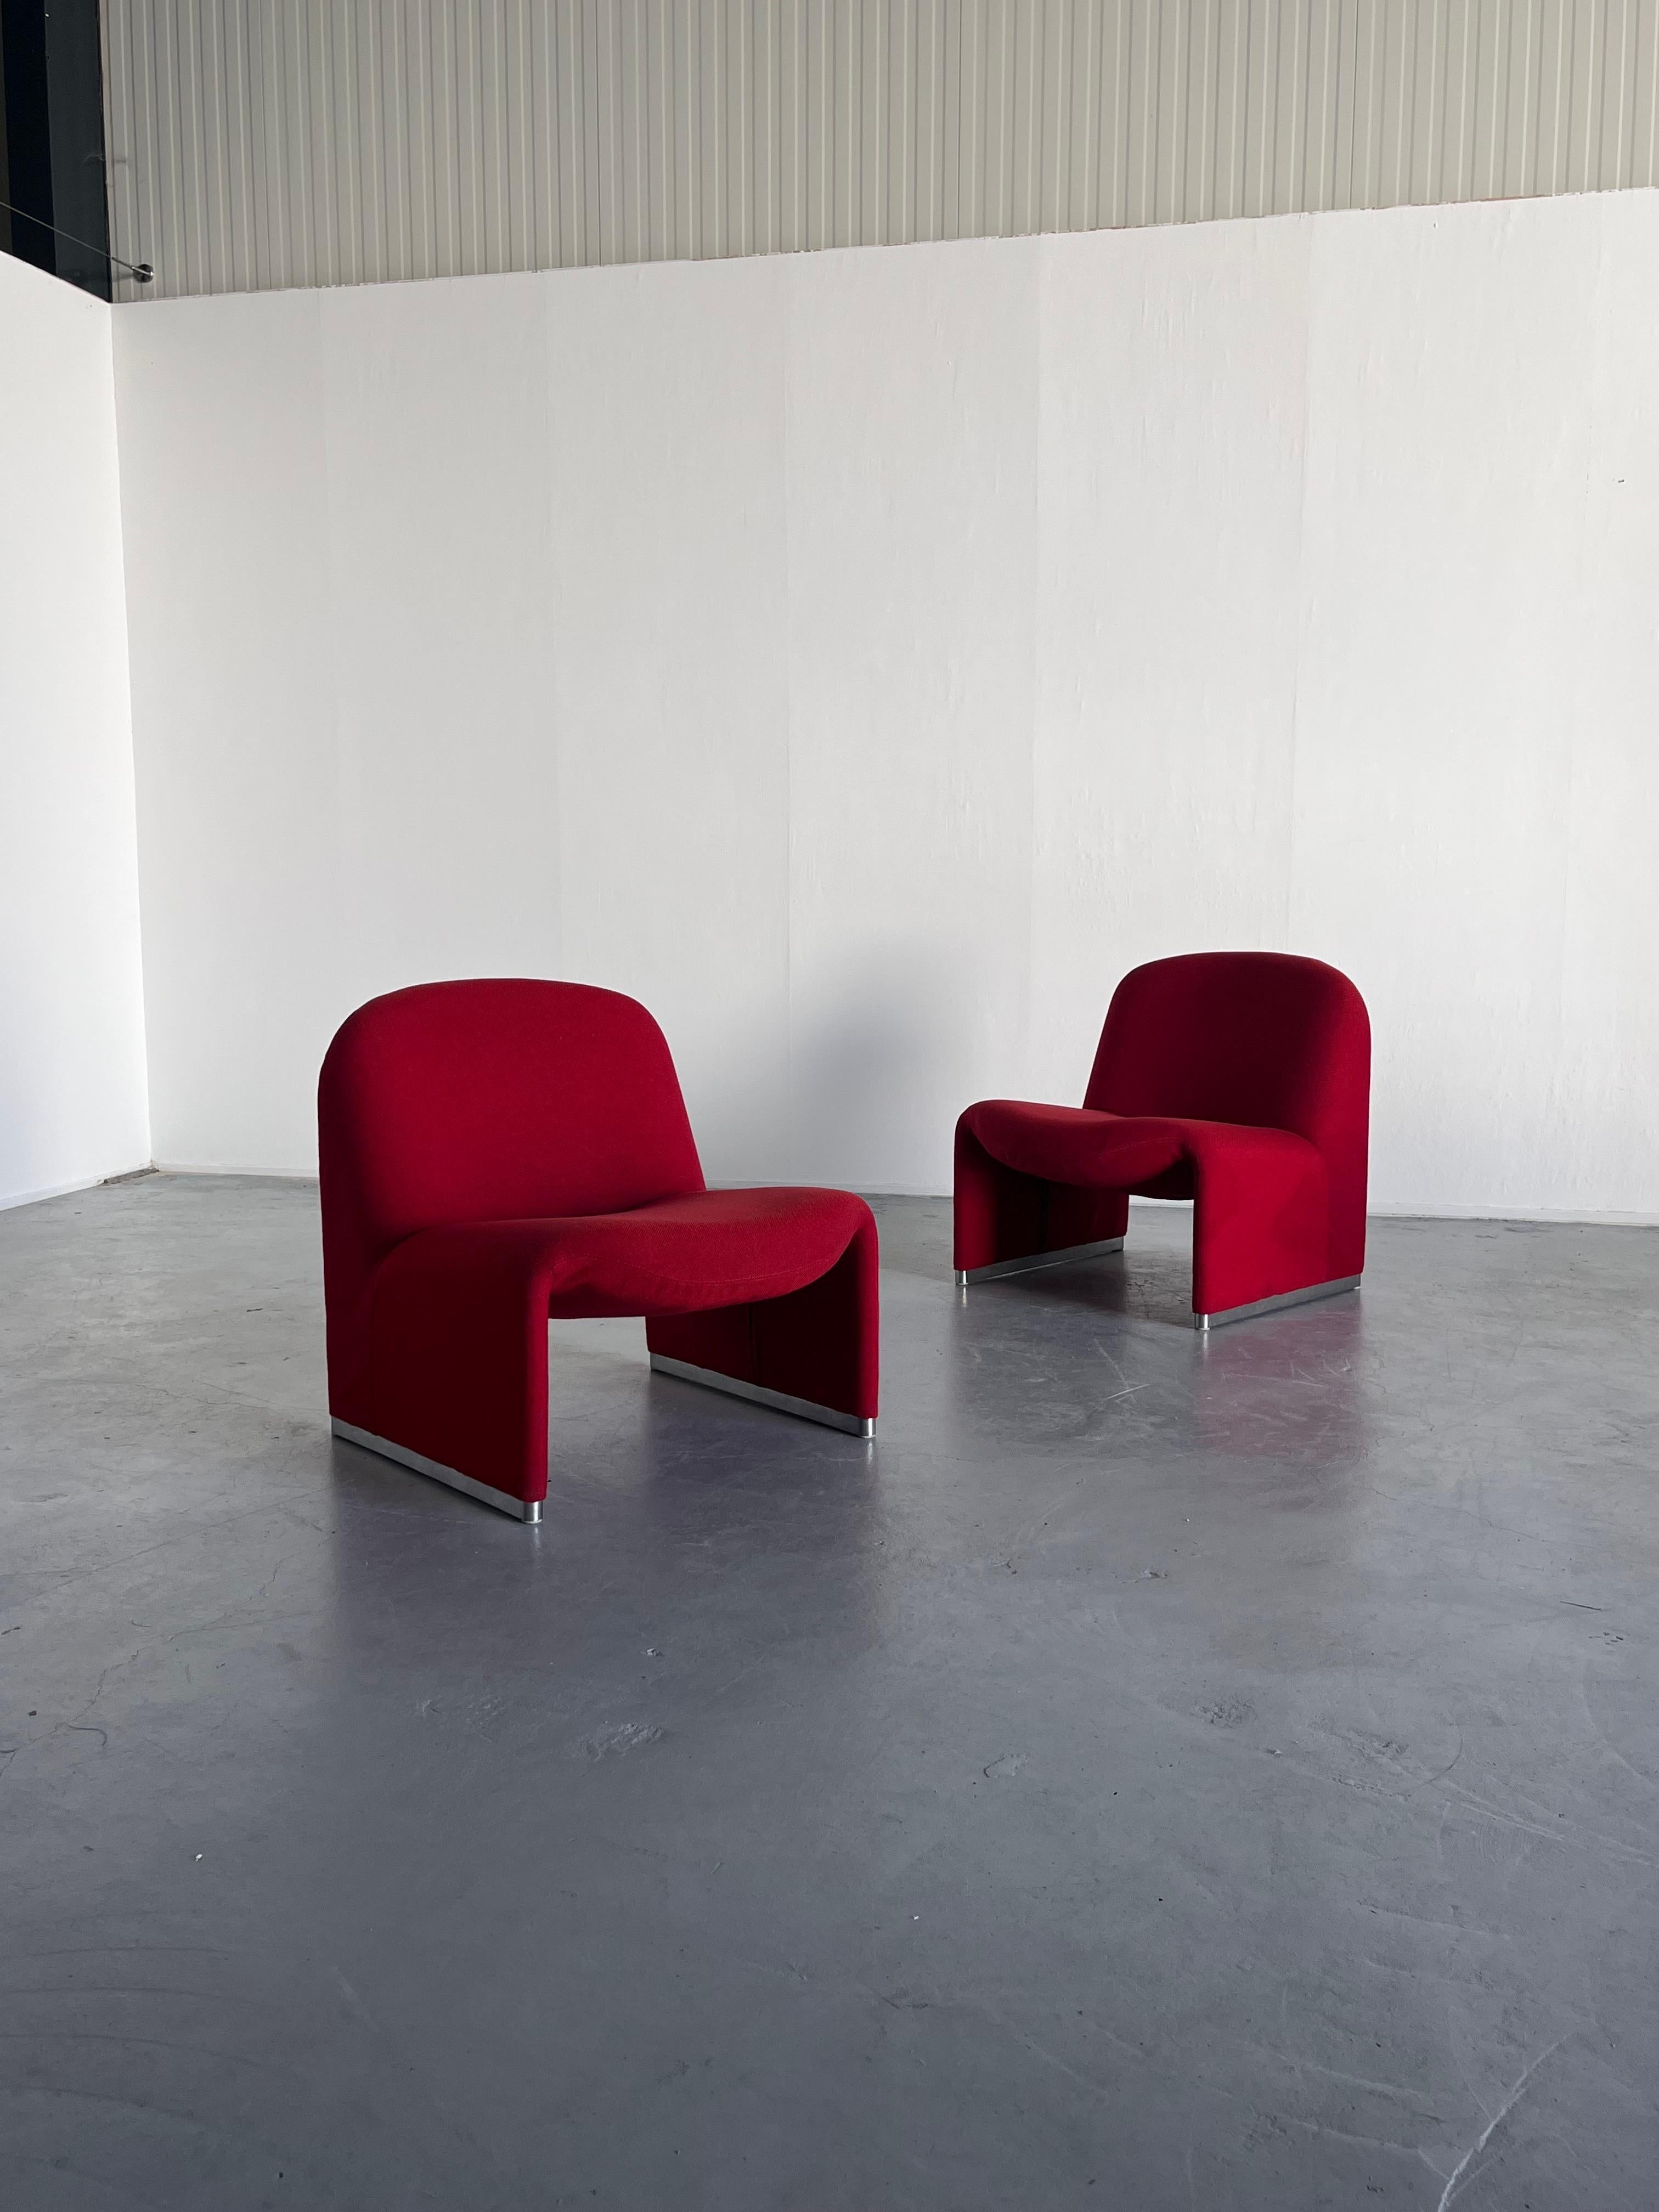 Two original vintage iconic 'Alky' chairs, designed by Giancarlo Piretti for Anonima Castelli. Produced in the early 1970s in Italy.

Iconic Italian design. 

Original vintage condition and original upholstery.
Very well preserved with expected